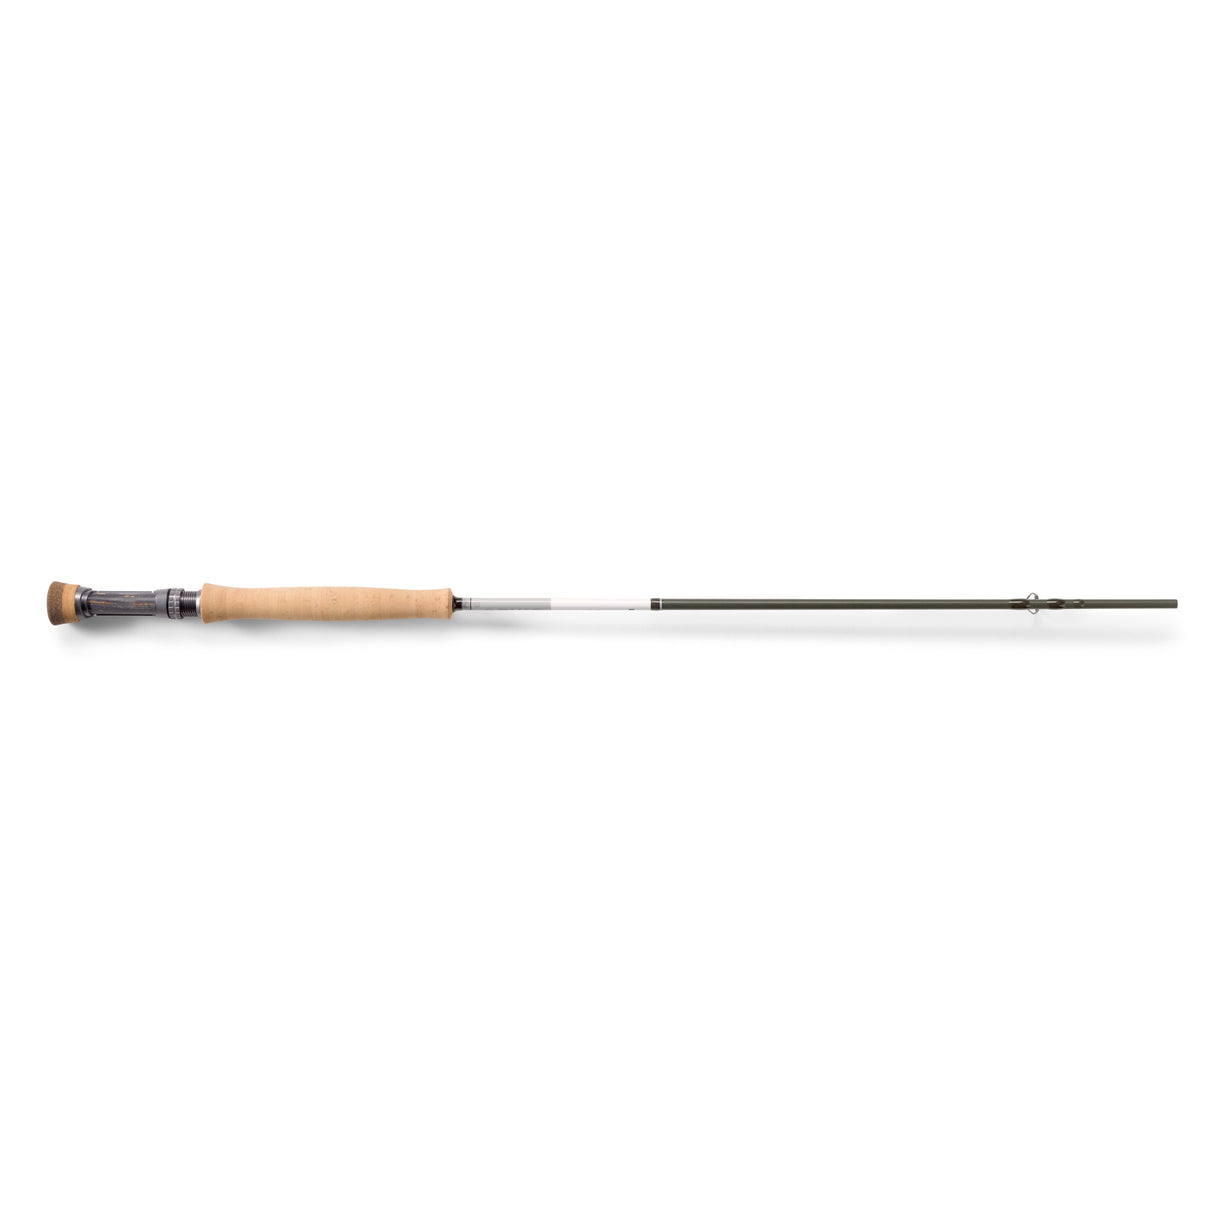 Helios F 9' 5-weight Fly Rod Outfit | Size 5-weight . 9' | Graphite | Orvis